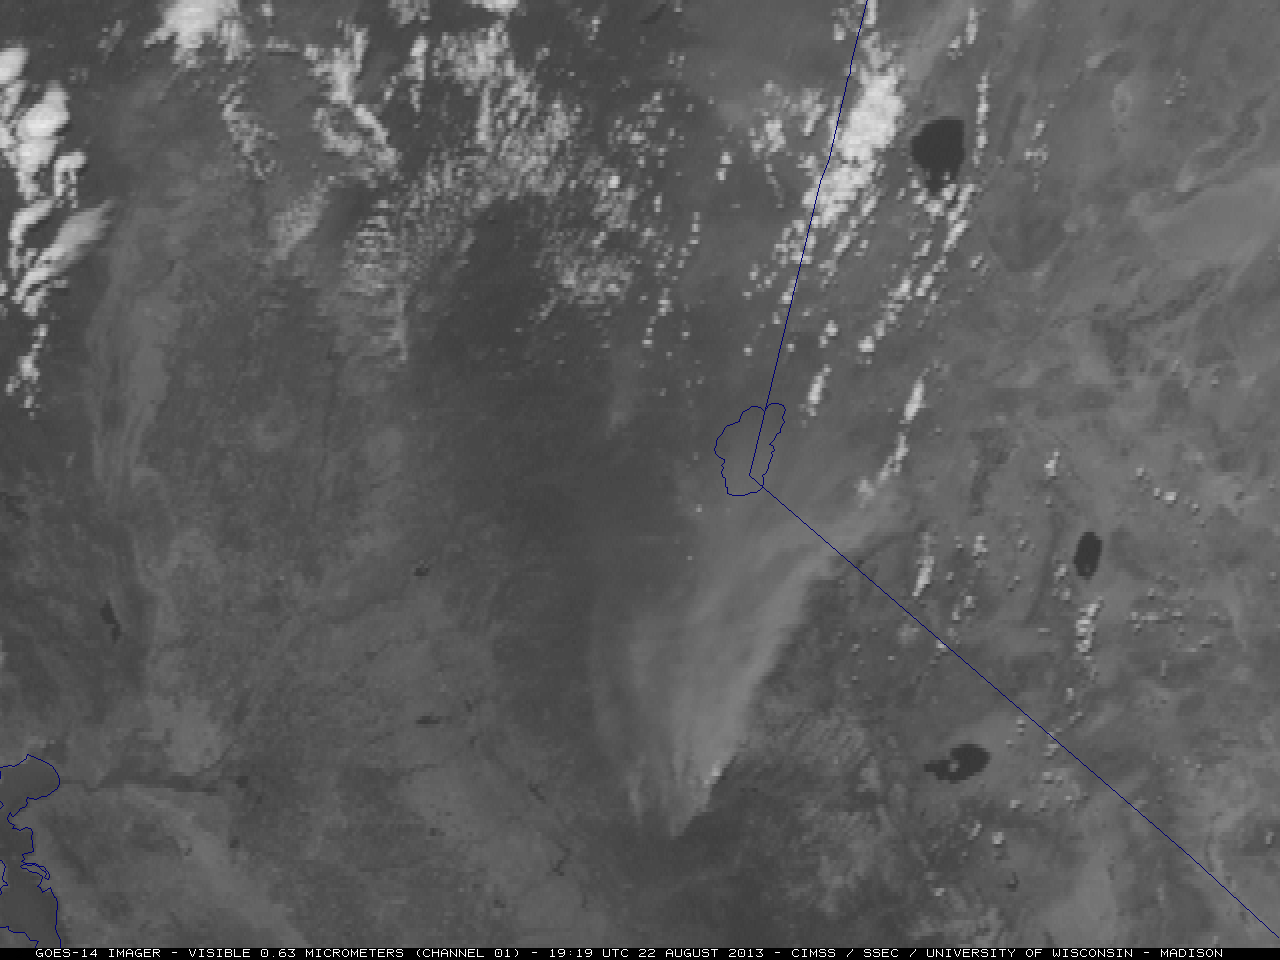 GOES-14 0.63 µm visible channel images (click image to play animation)